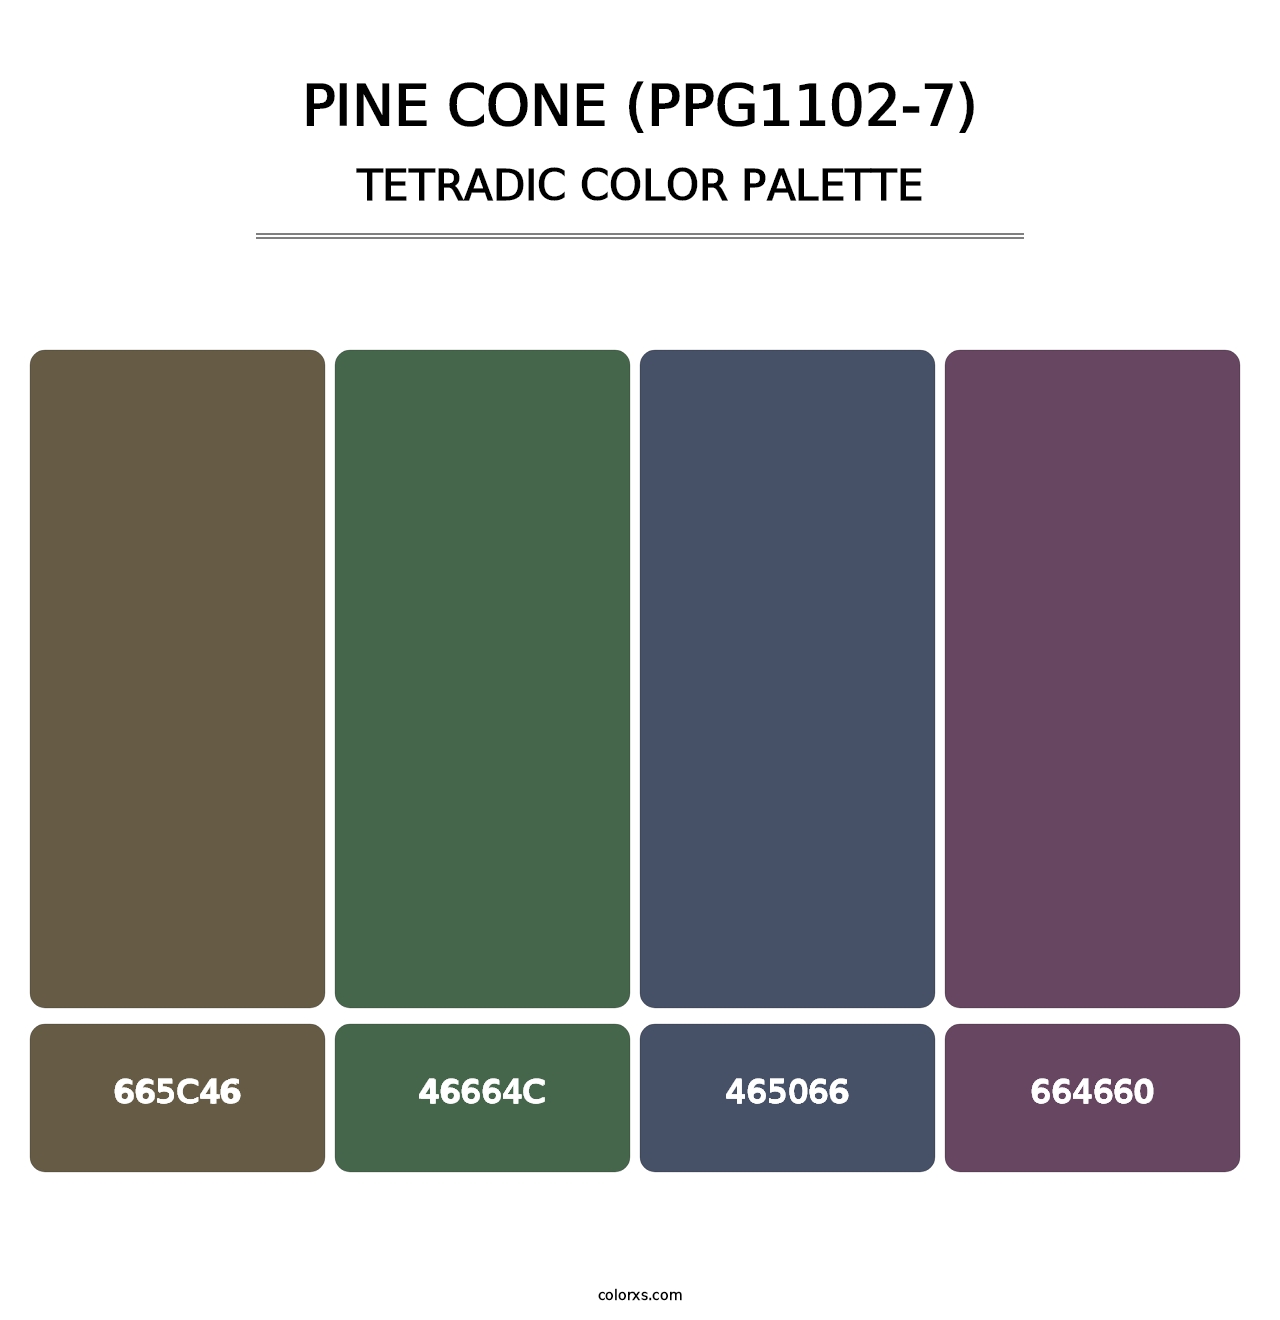 Pine Cone (PPG1102-7) - Tetradic Color Palette